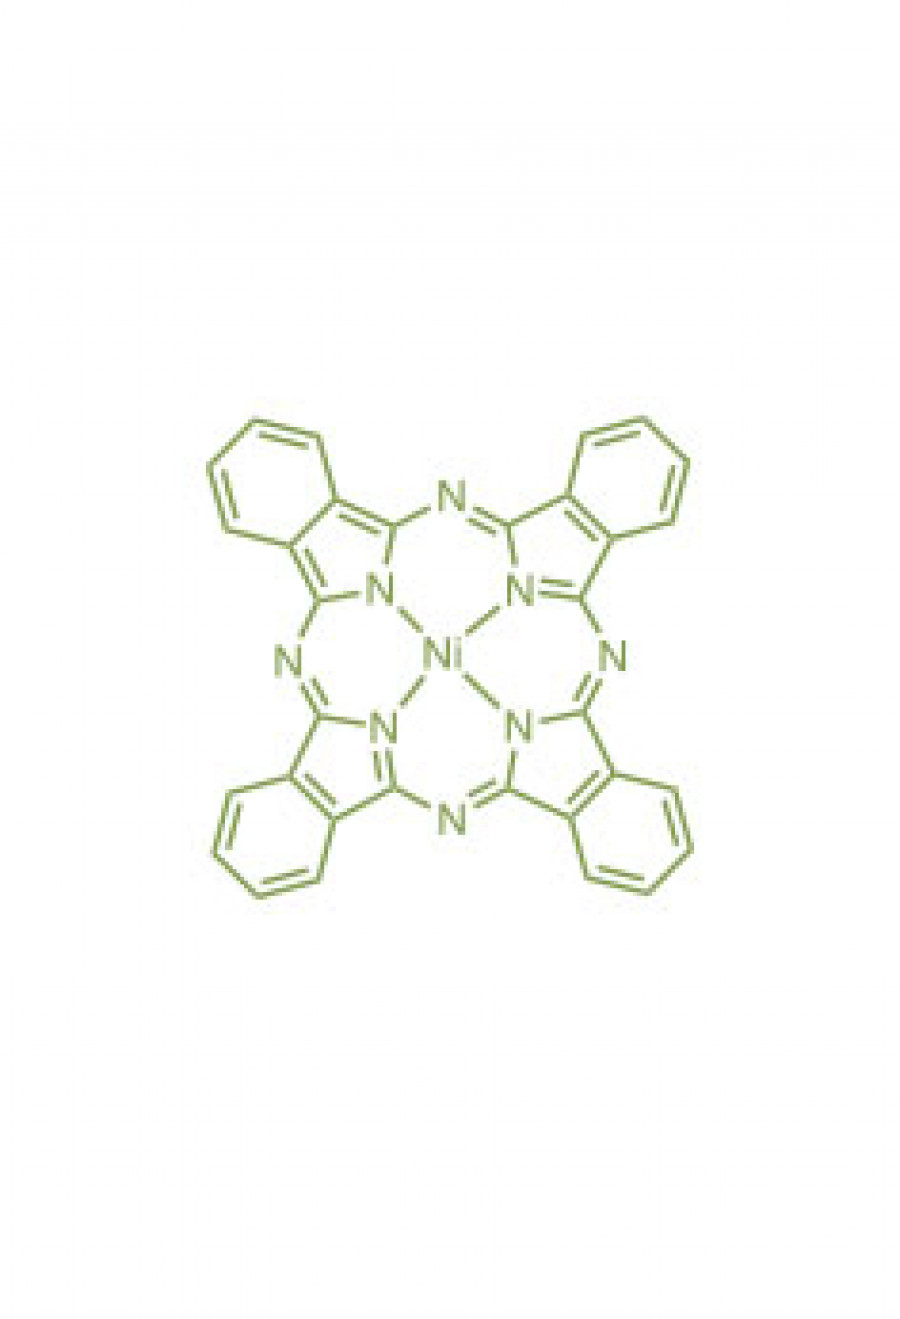 nickel(II) phthalocyanine  | Porphychem Expert porphyrin synthesis for research & industry